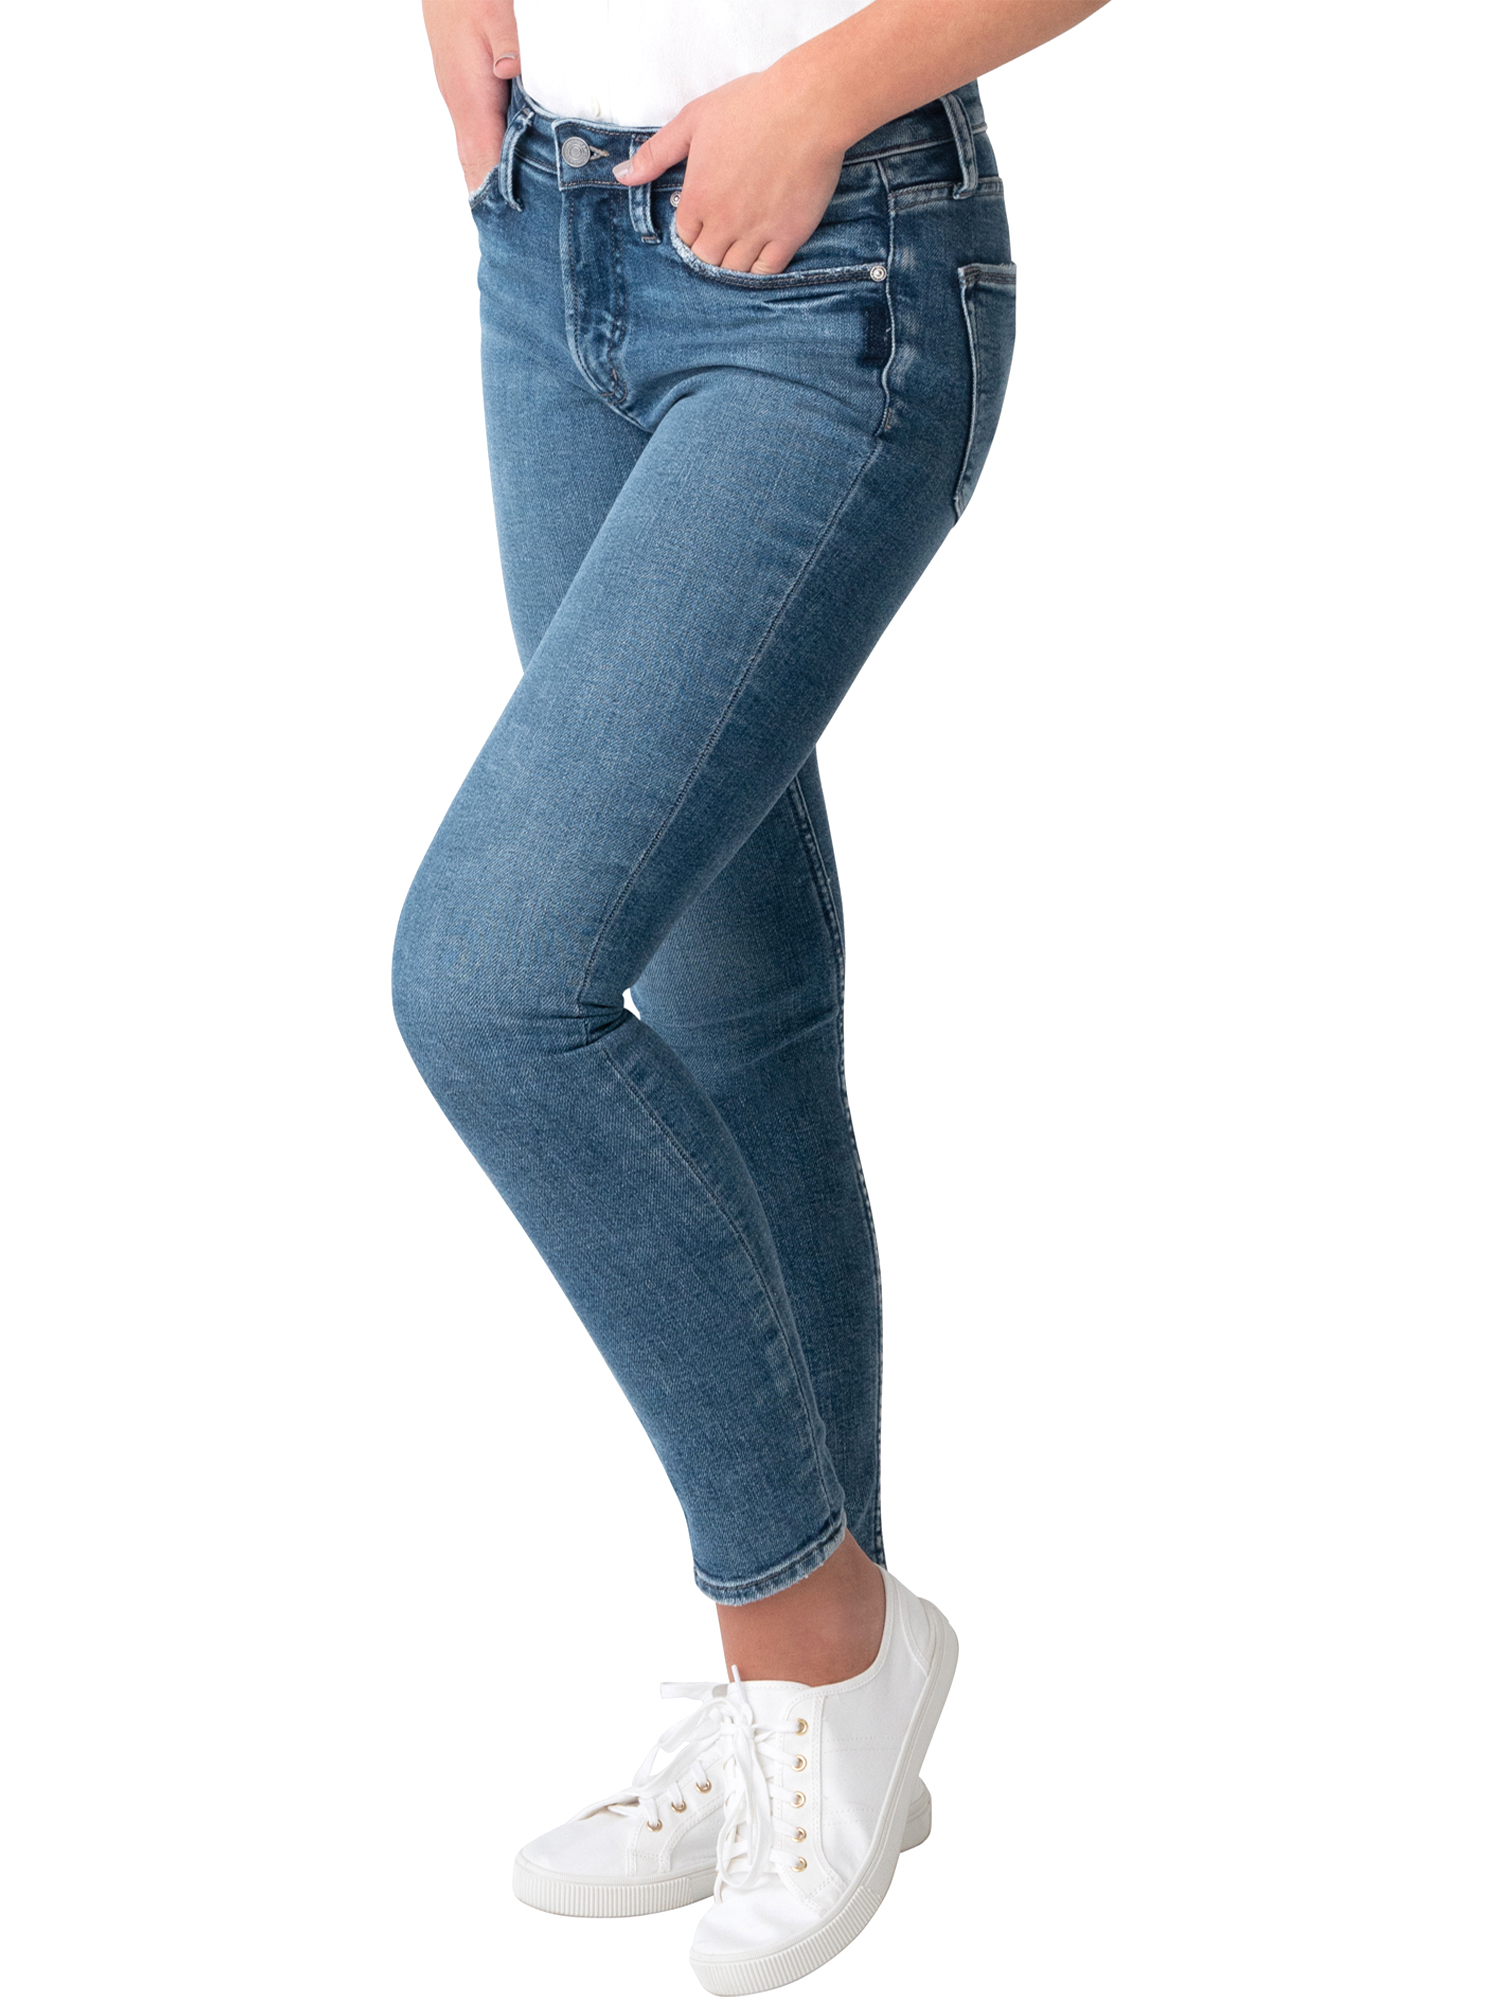 Silver Jeans Co. Women's Most Wanted Mid Rise Skinny Jeans, Waist Sizes 24-36 - image 3 of 3